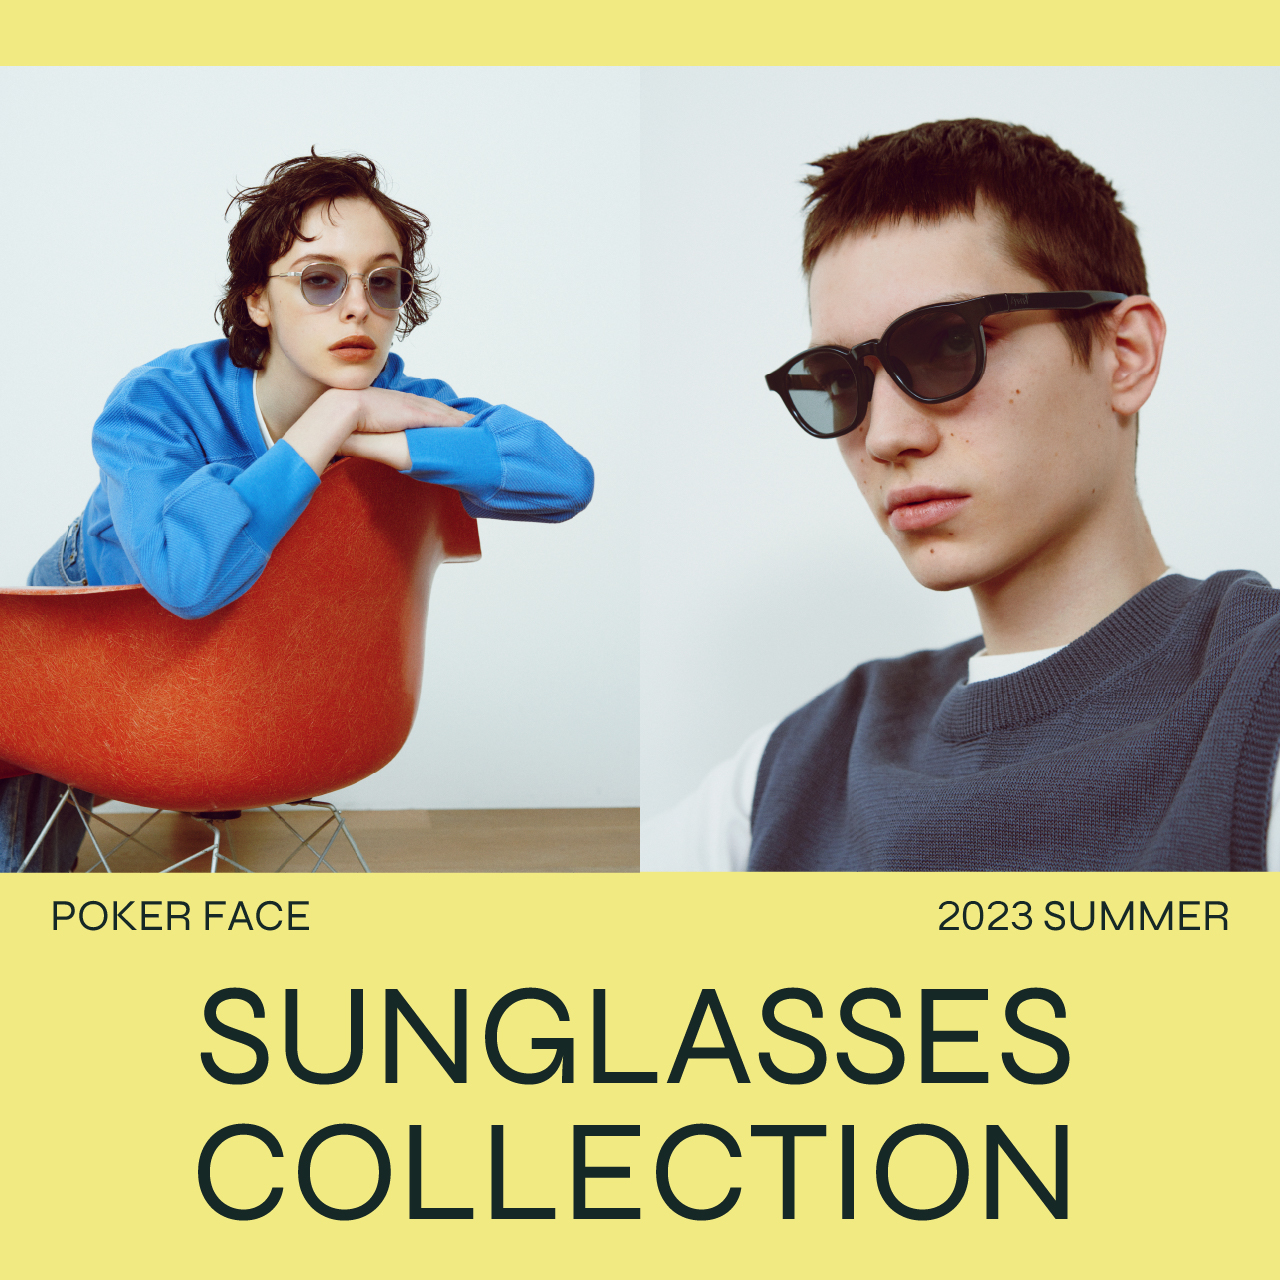 SUNGLASSES COLLECTION